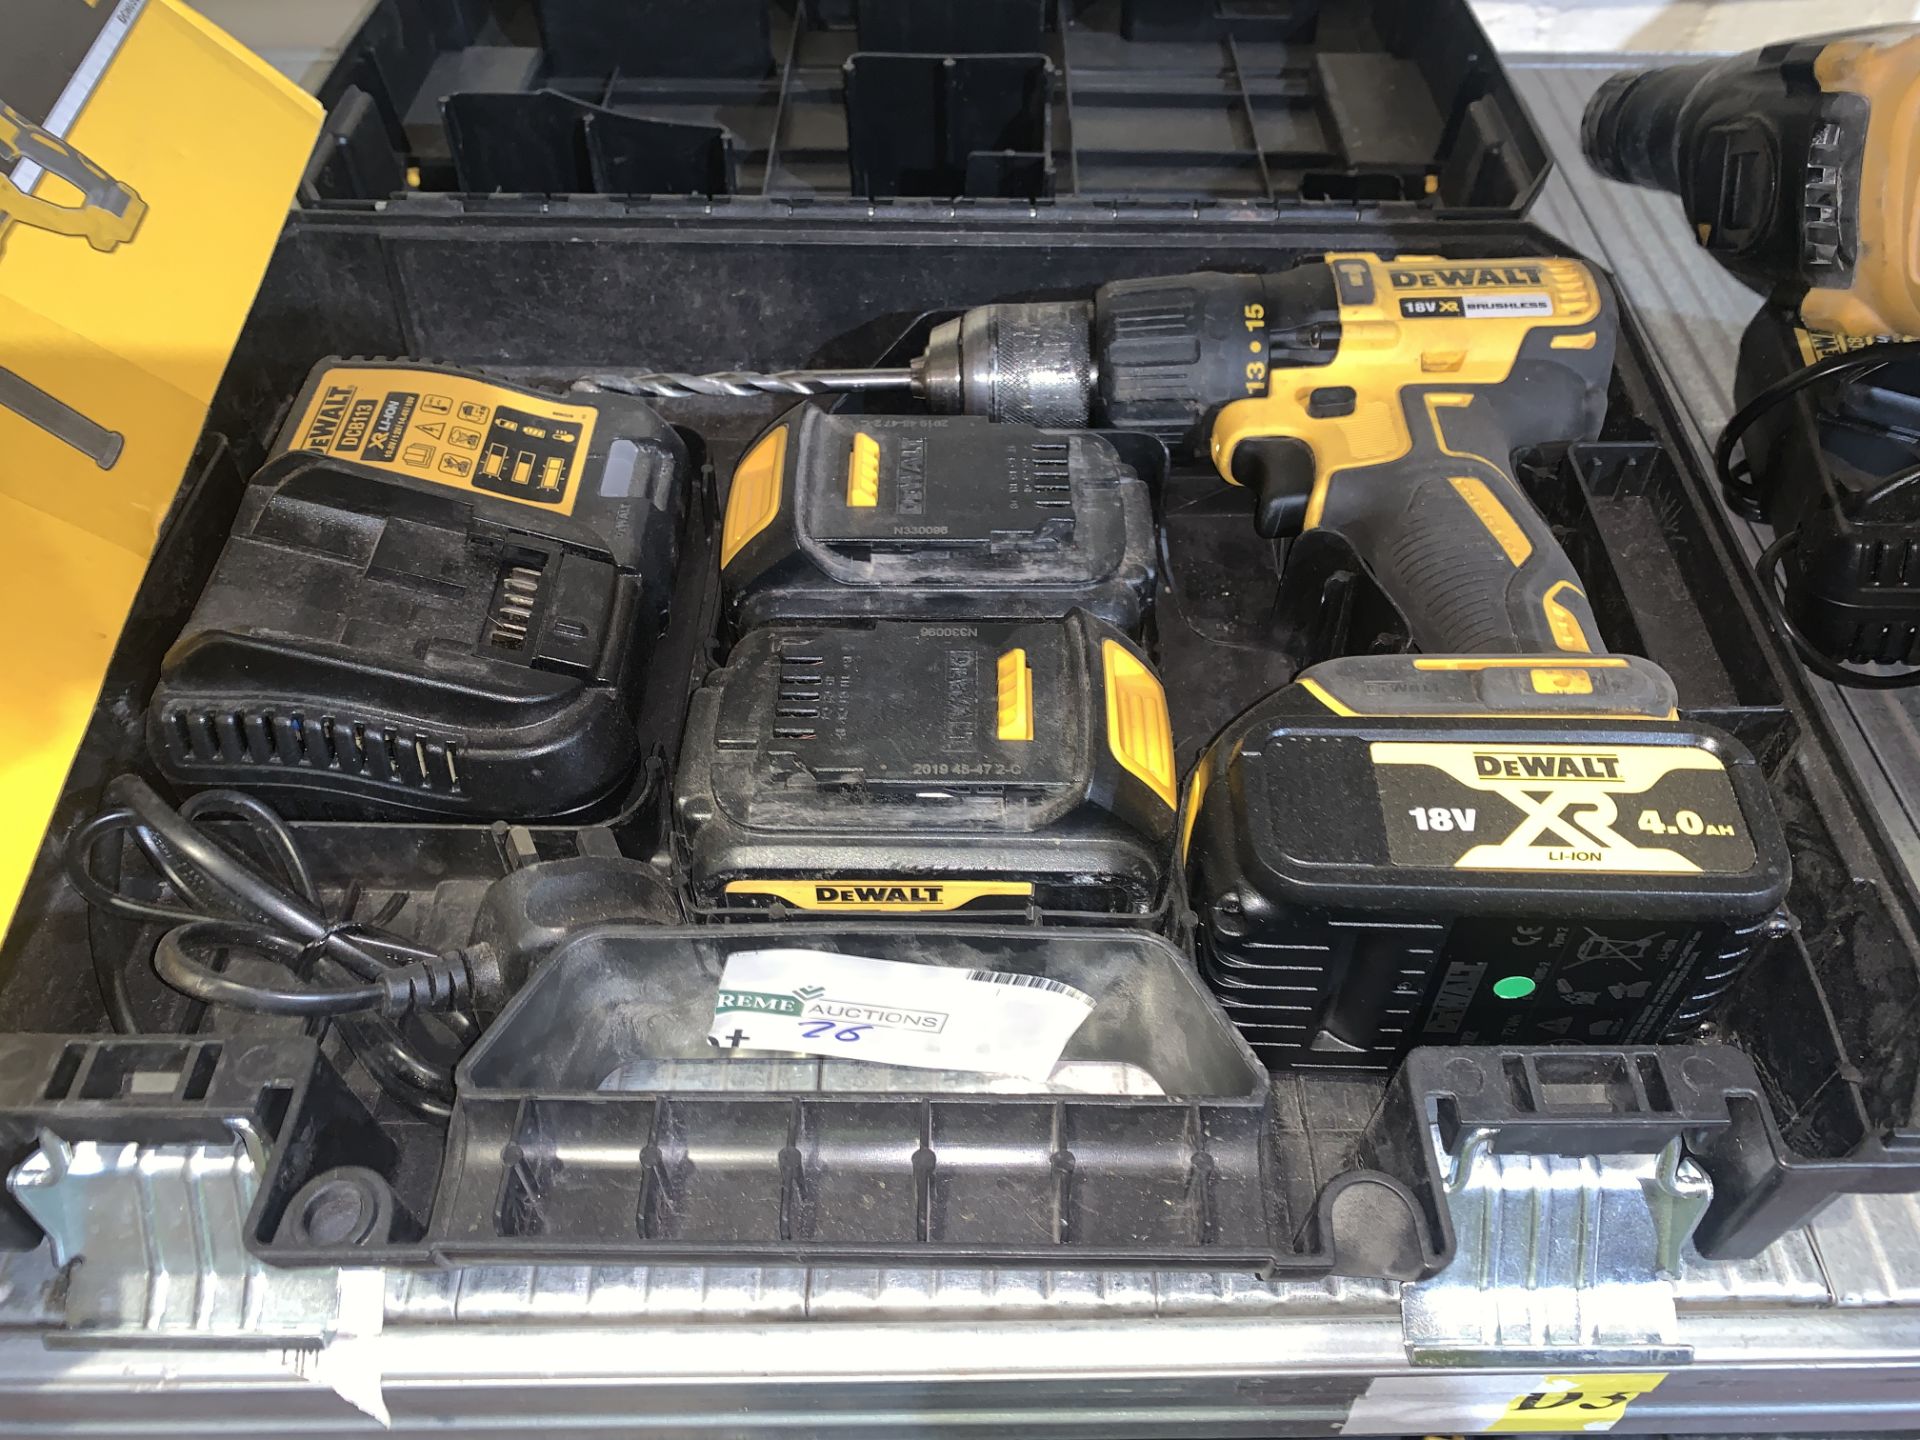 DEWALT DCD778M2T COMBI DRILL COMES WITH 3 BATTERIES, CHARGER AND CARRY CASE (UNCHECKED / UNTESTED )